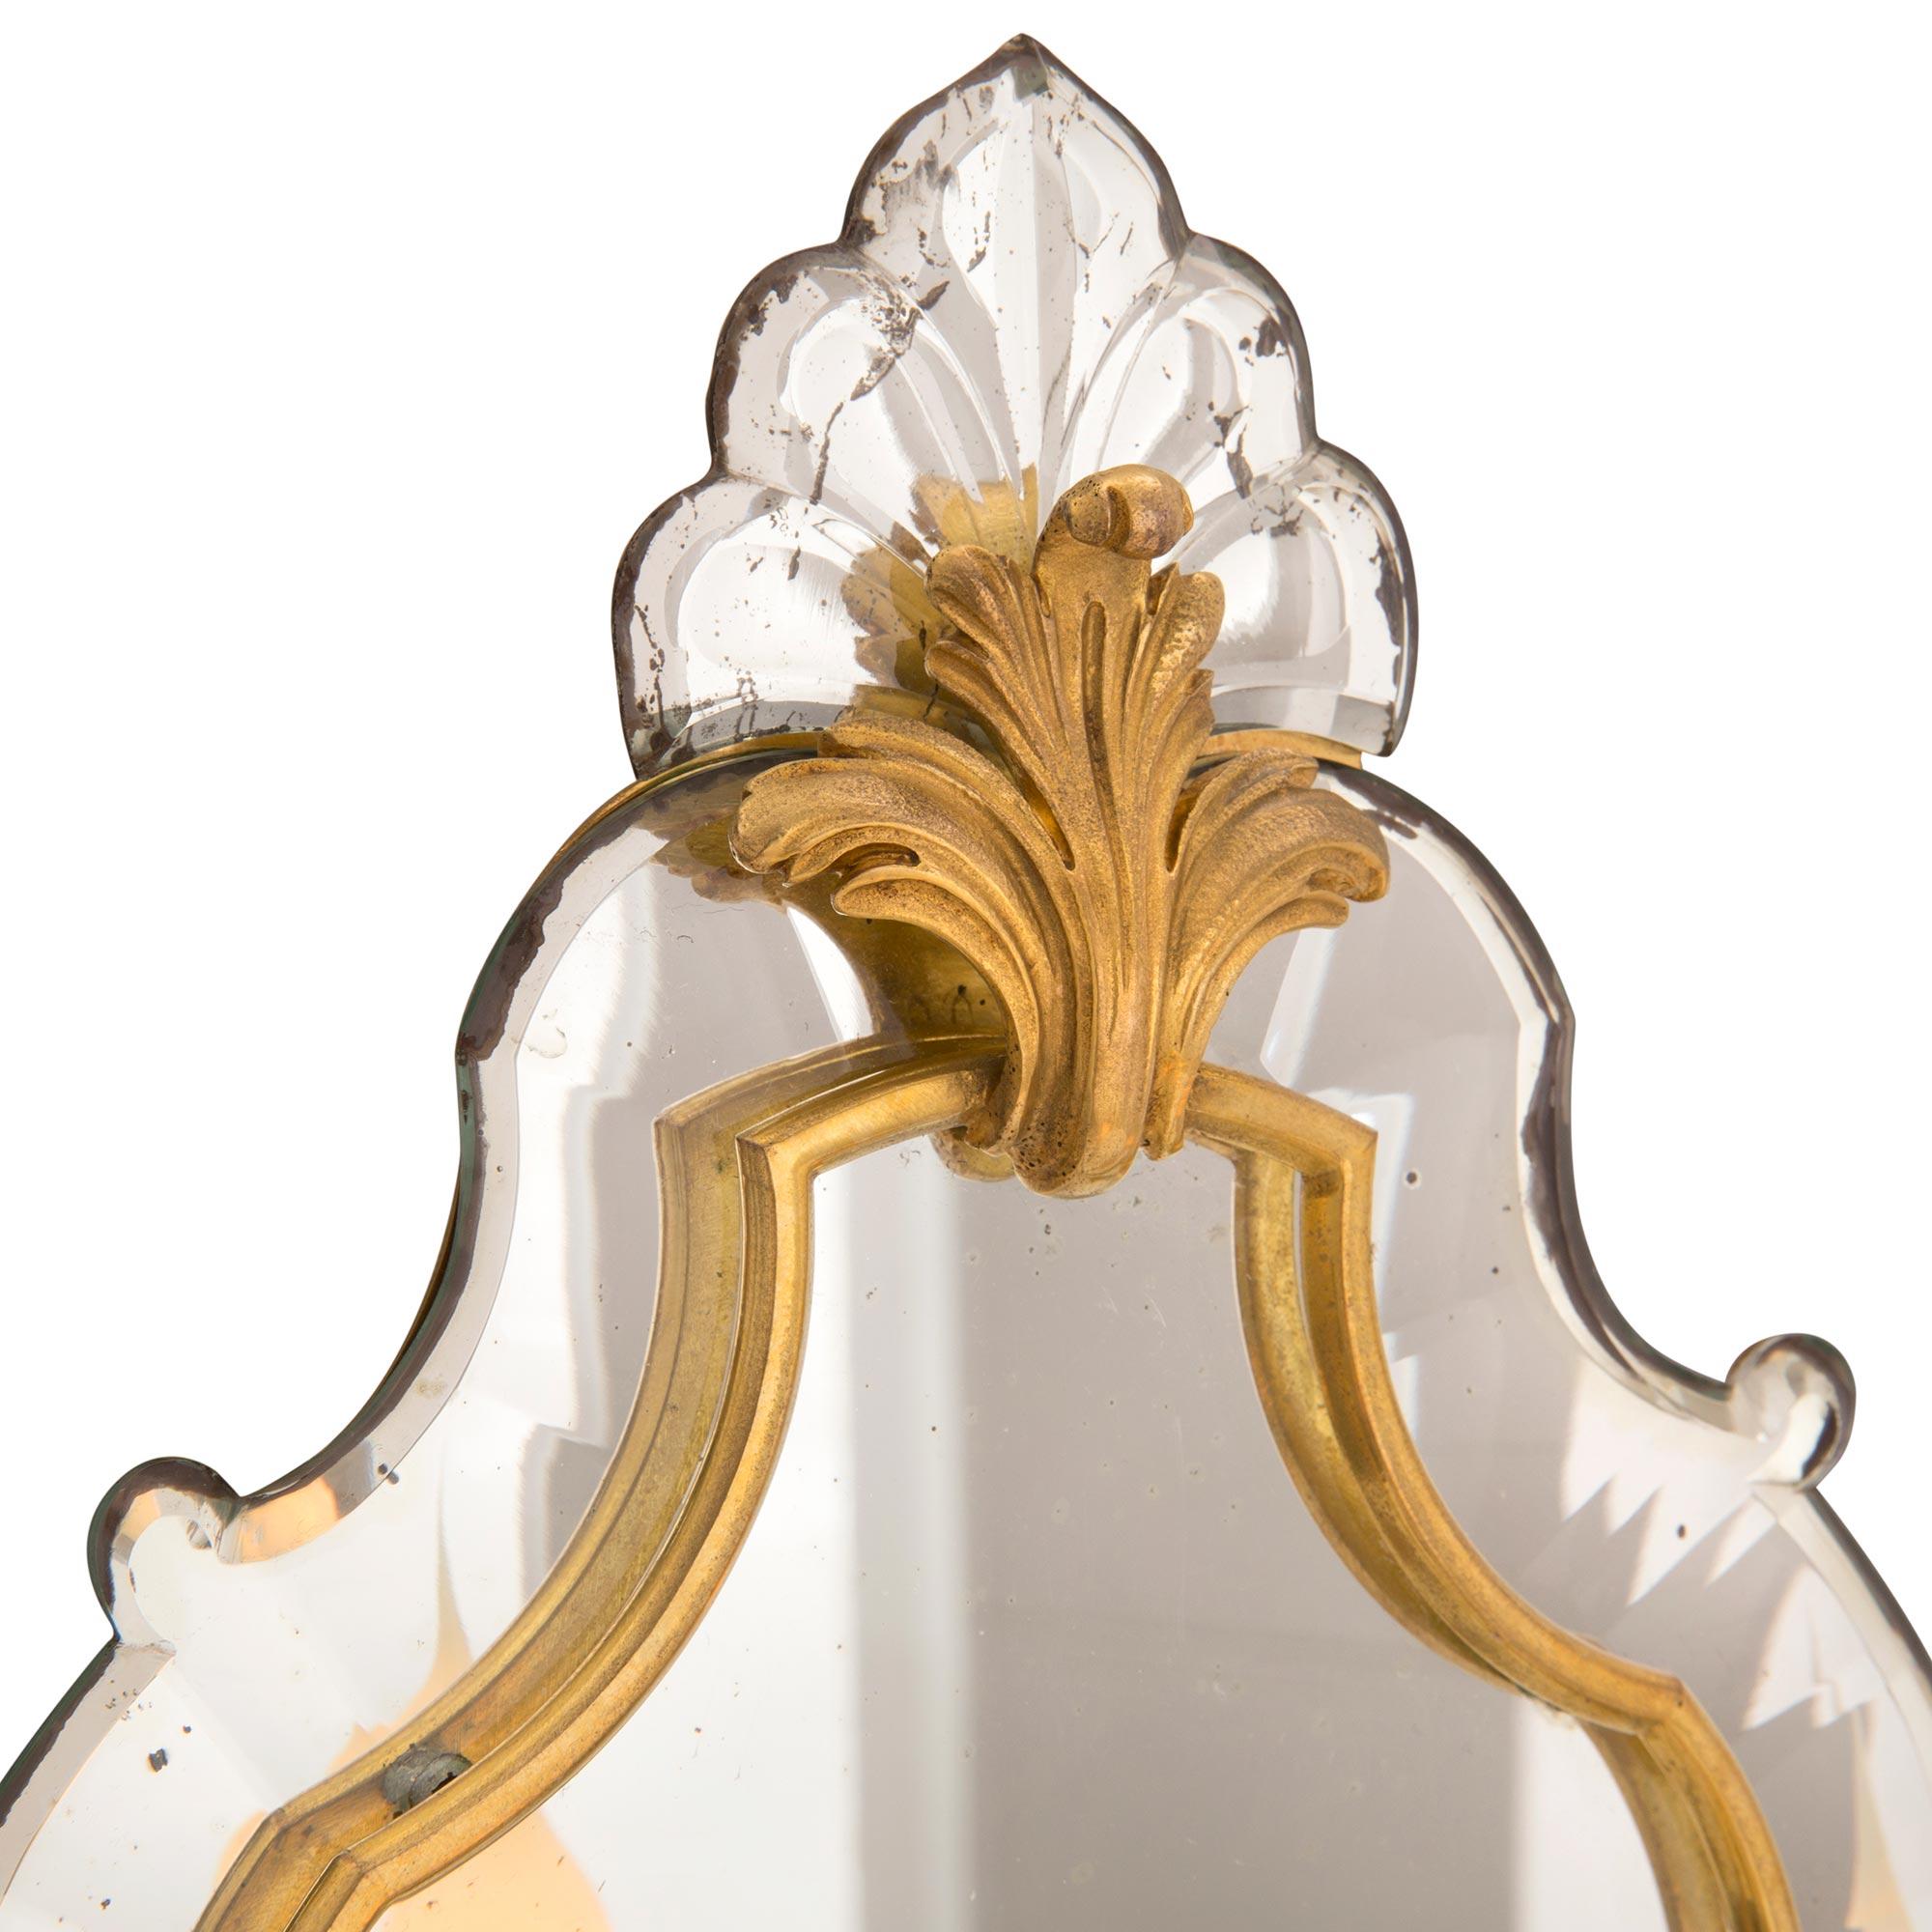 Pair of French Turn-of-the-Century Venetian Style Ormolu and Mirrored Sconces For Sale 1